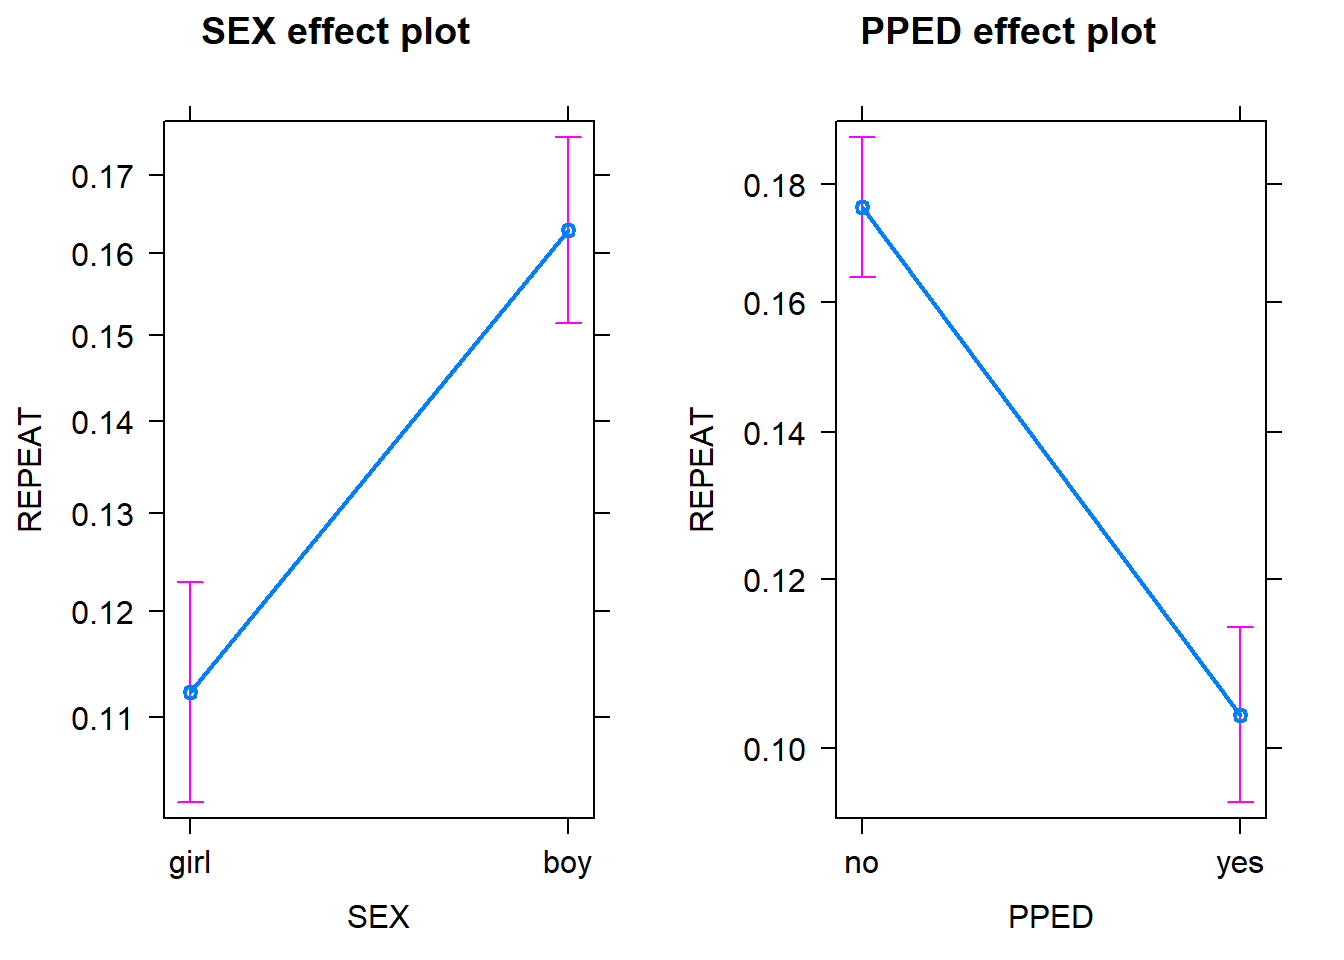 Regression results of the fixed effect model with cluster standard